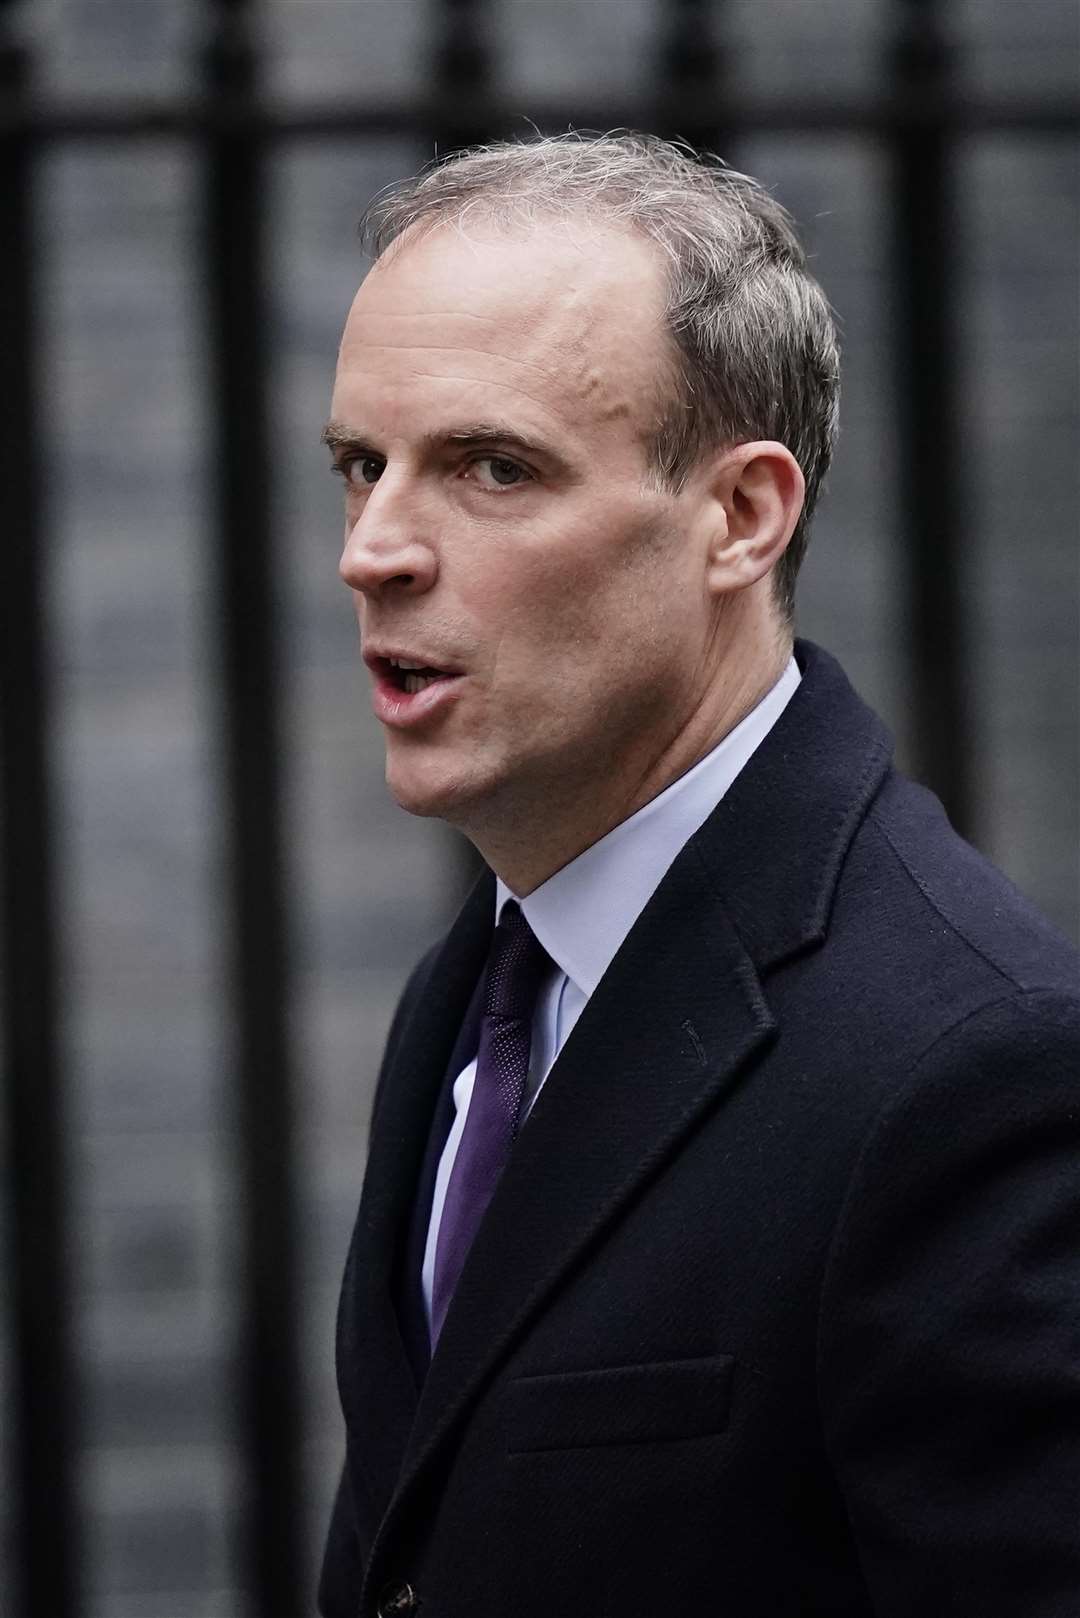 Deputy Prime Minister Dominic Raab said the changes are a common-sense measure that will give vulnerable people peace of mind (Aaron Chown/PA)